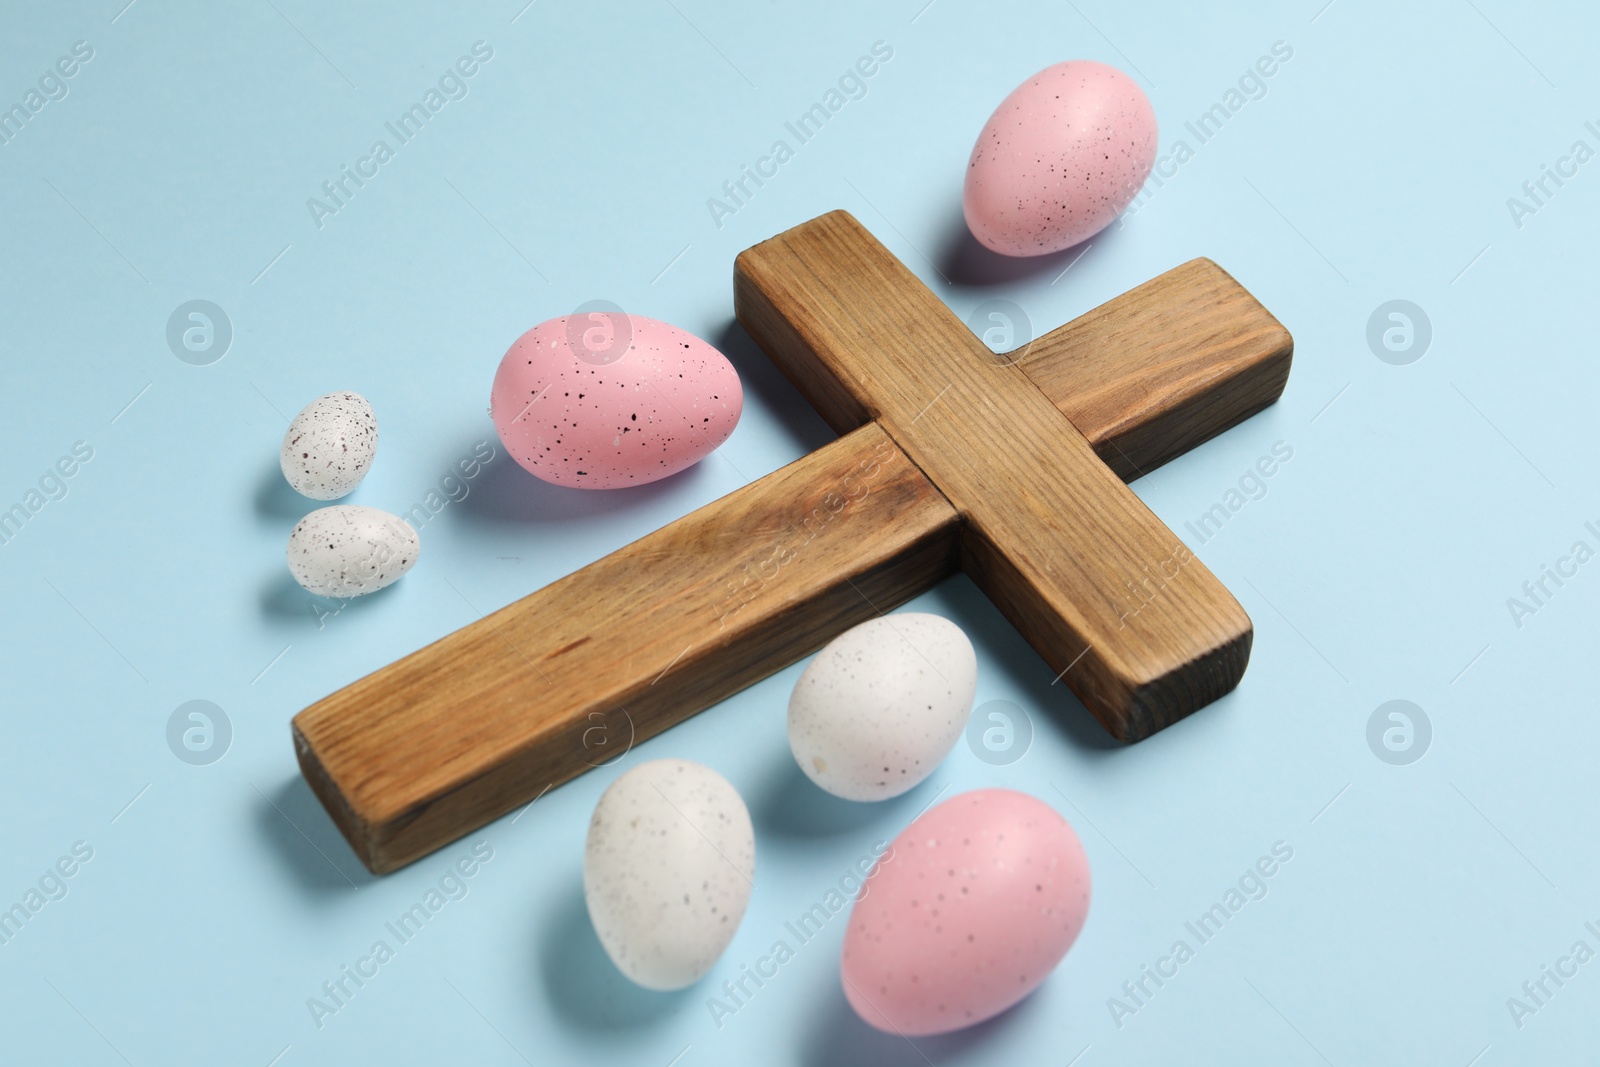 Photo of Wooden cross and painted Easter eggs on light blue background